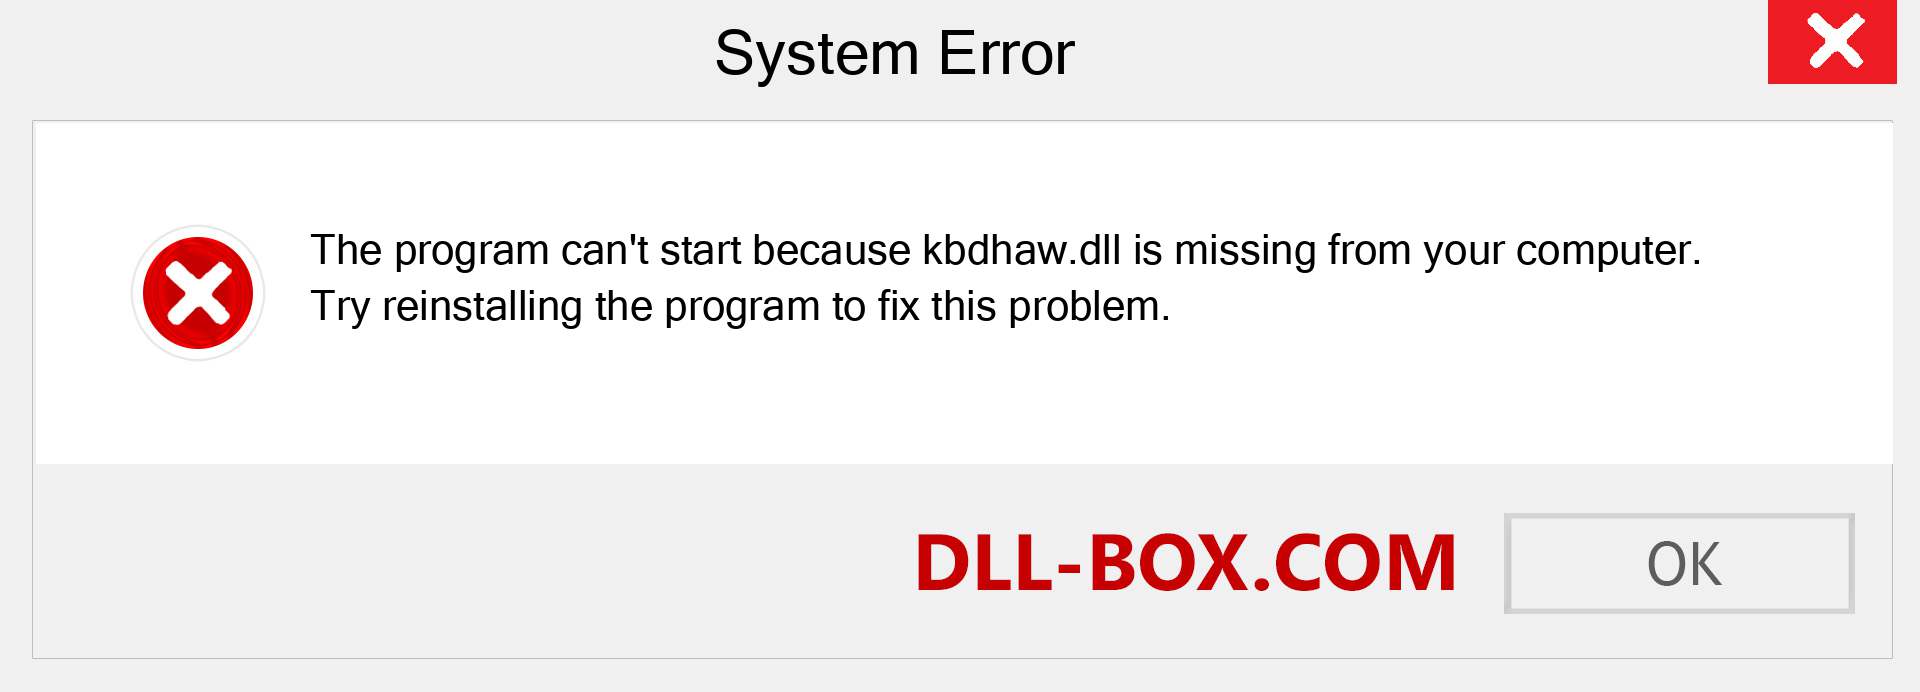  kbdhaw.dll file is missing?. Download for Windows 7, 8, 10 - Fix  kbdhaw dll Missing Error on Windows, photos, images